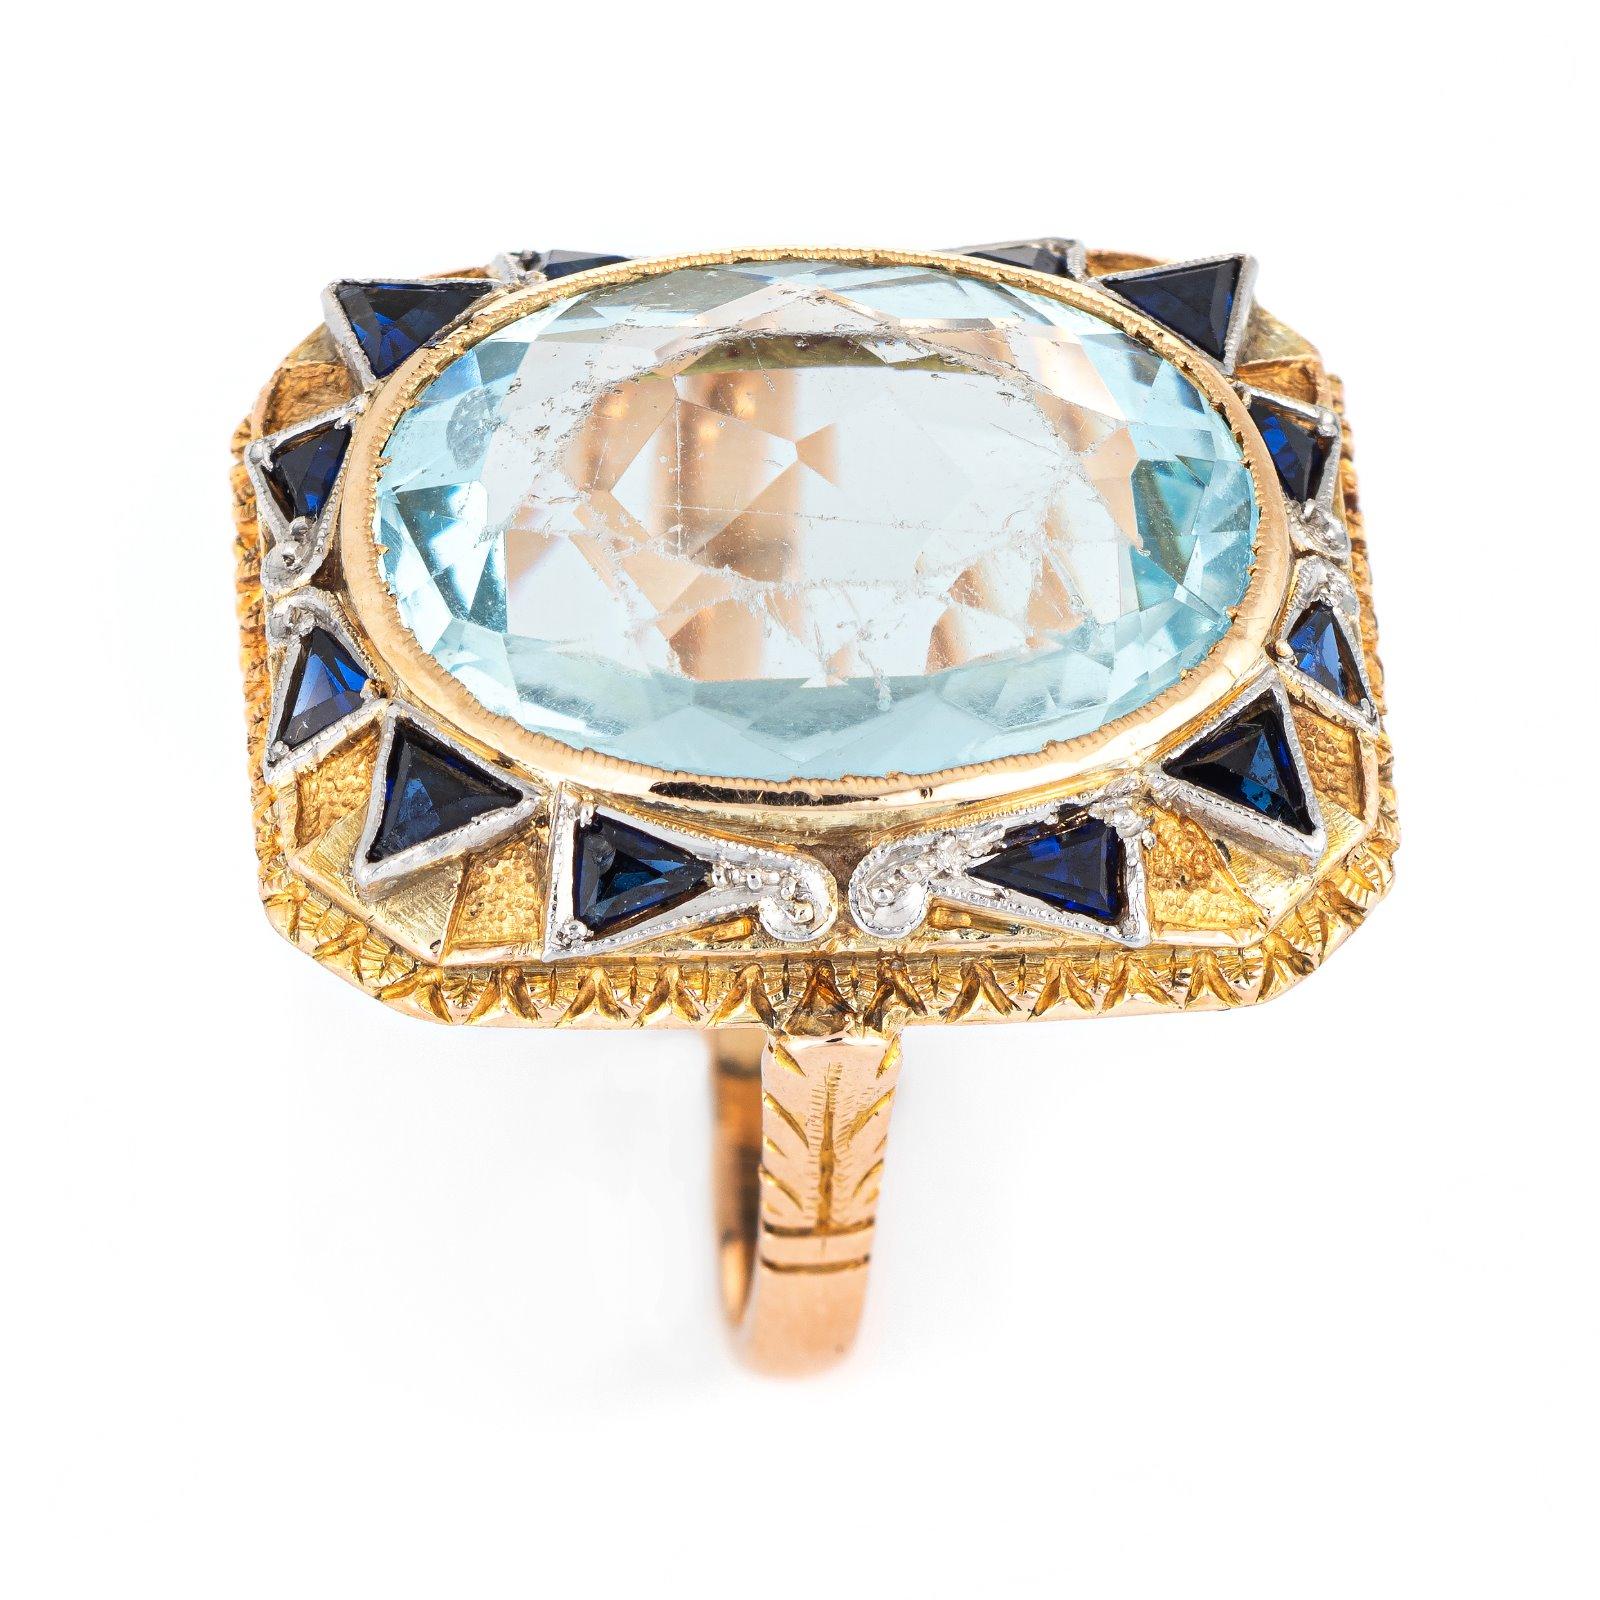 Stylish vintage aquamarine & sapphire cocktail ring (circa 1920s to 1930s) crafted in 18 karat yellow gold. 

Faceted oval cut aquamarine measures 18mm x 13mm (estimated at 10 carats), accented with 12 estimated 0.05 carat triangular cut sapphires